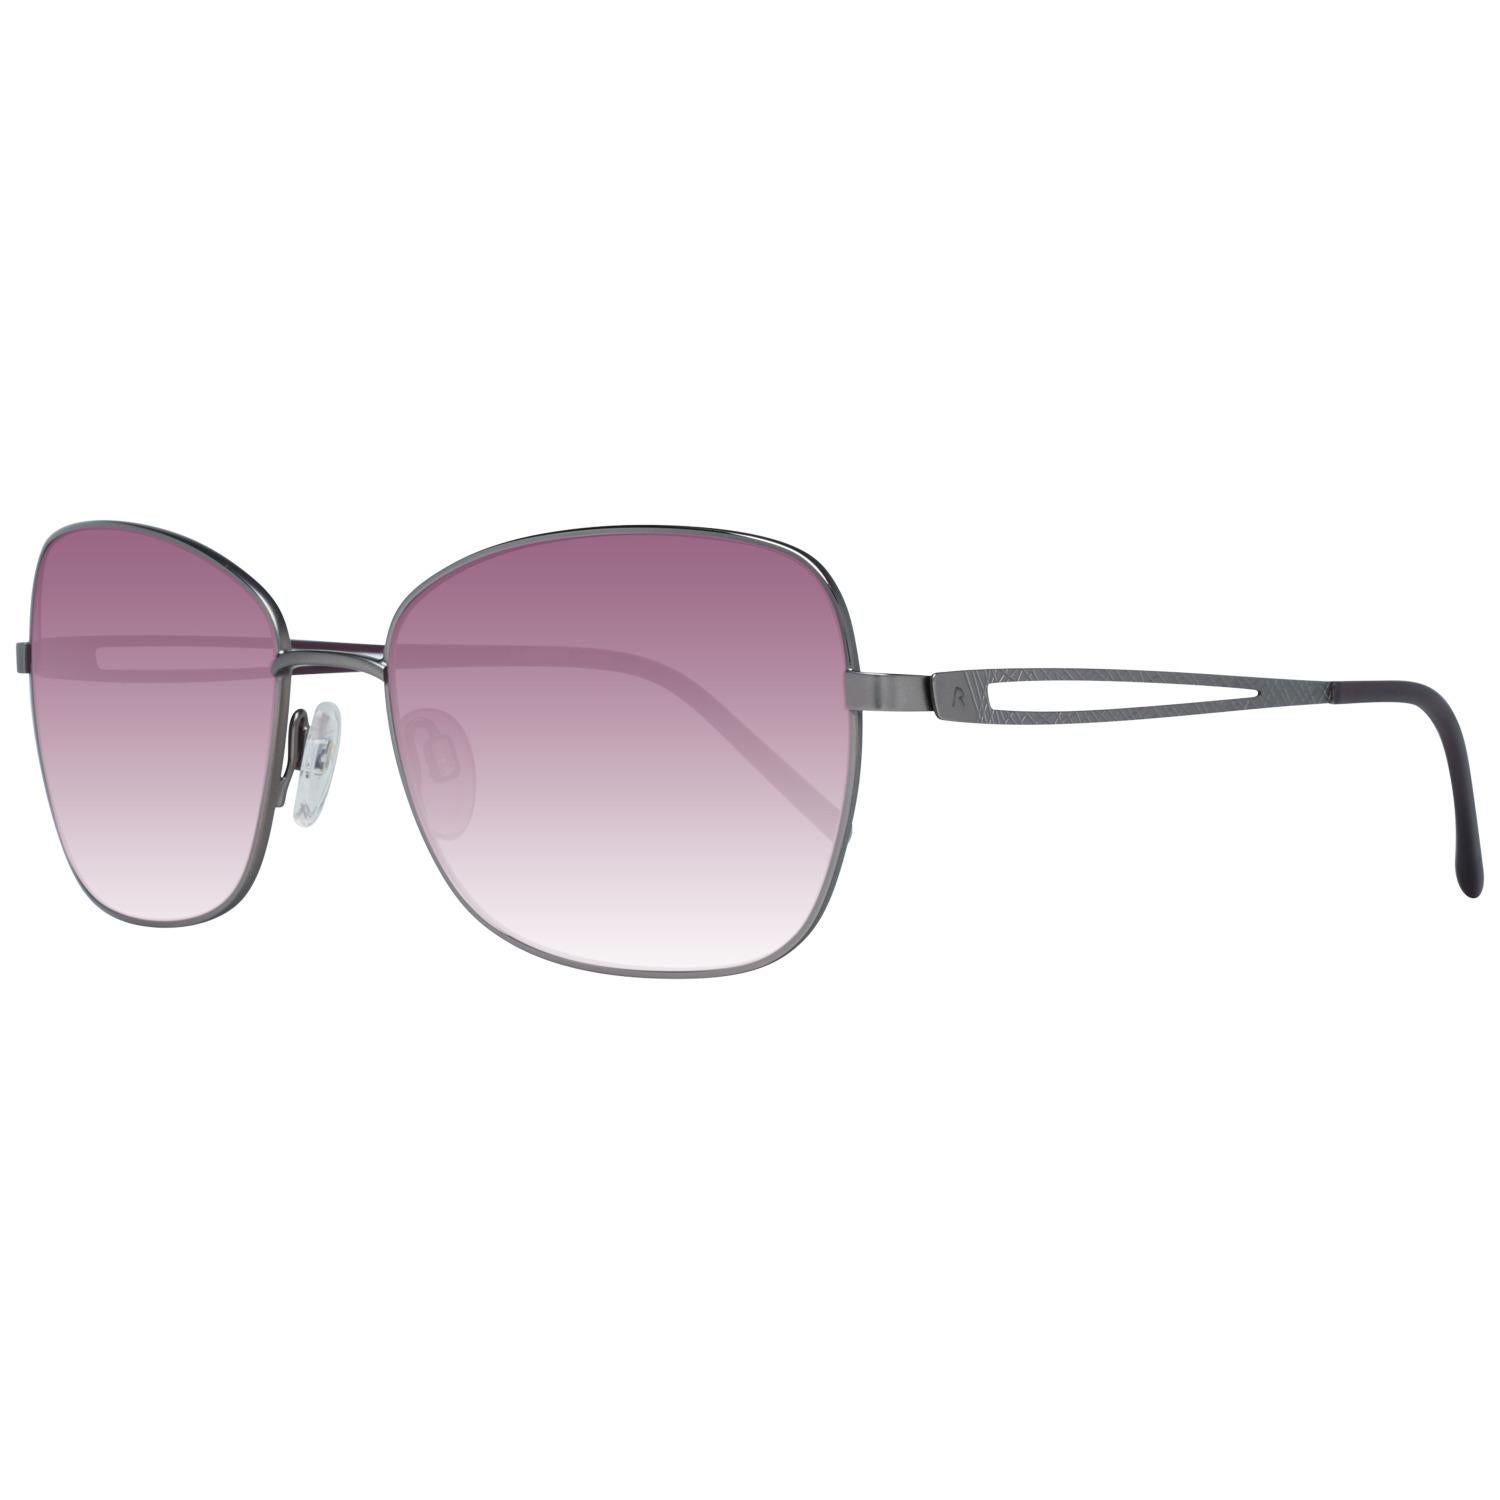 Details
MATERIAL: Metal
COLOR: Gray
MODEL: R1419-D-5717-135-V509-E42
GENDER: Women
COUNTRY OF MANUFACTURE: China
TYPE: Sunglasses
ORIGINAL CASE?: Yes
STYLE: Oval
OCCASION: Casual
FEATURES: Lightweight
LENS COLOR: Pink
LENS TECHNOLOGY: No Extra
YEAR